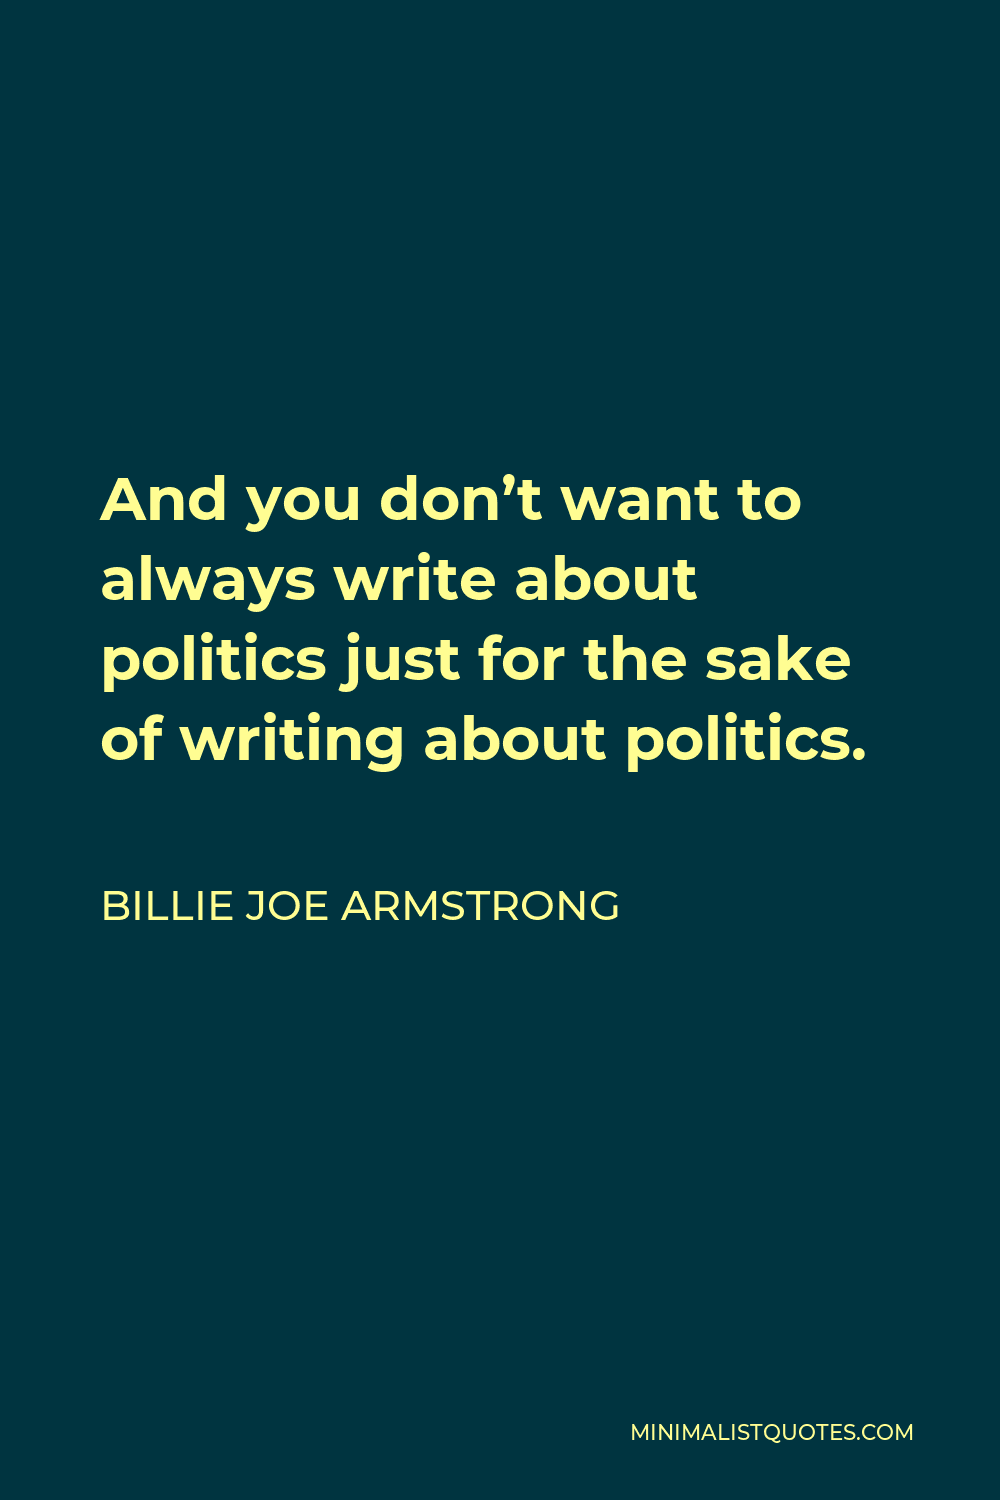 Billie Joe Armstrong Quote - And you don’t want to always write about politics just for the sake of writing about politics.